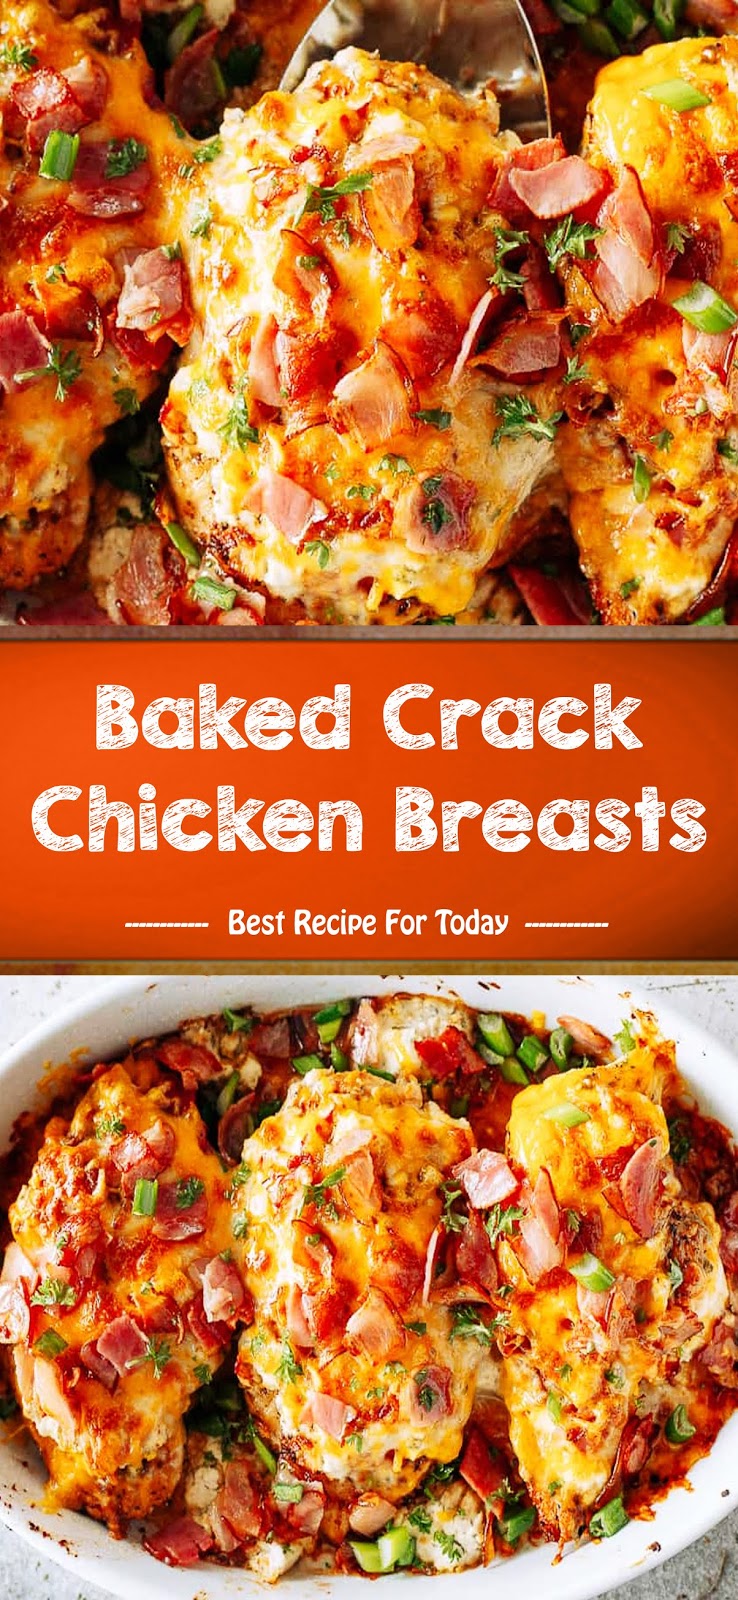 Baked Crack Chicken Breasts - 3 SECONDS